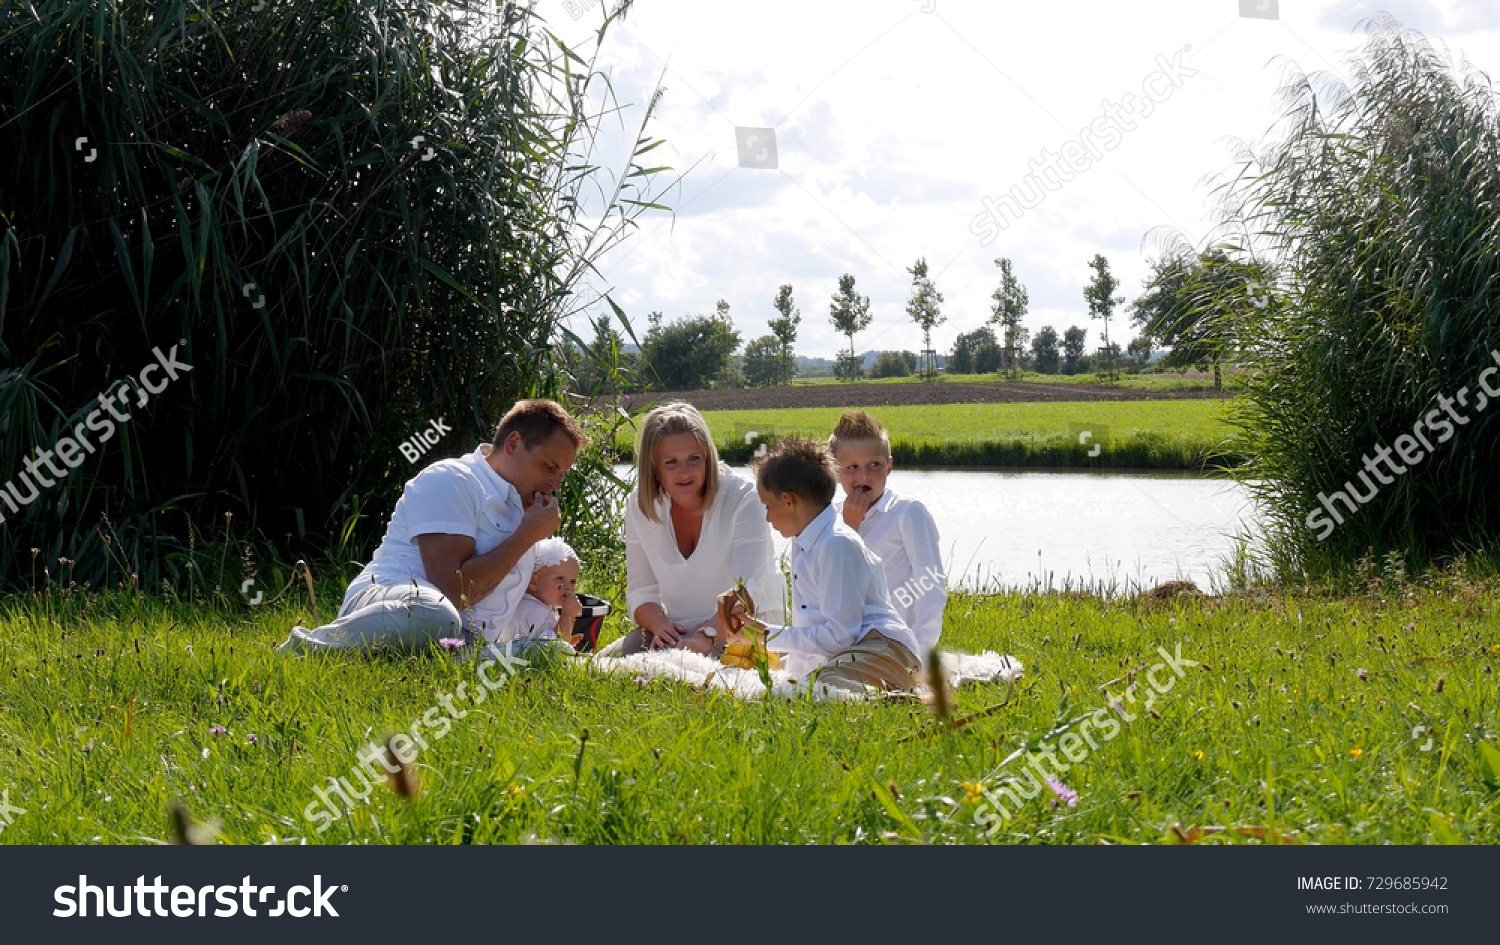 Family doing a picnic on the lawn #729685942